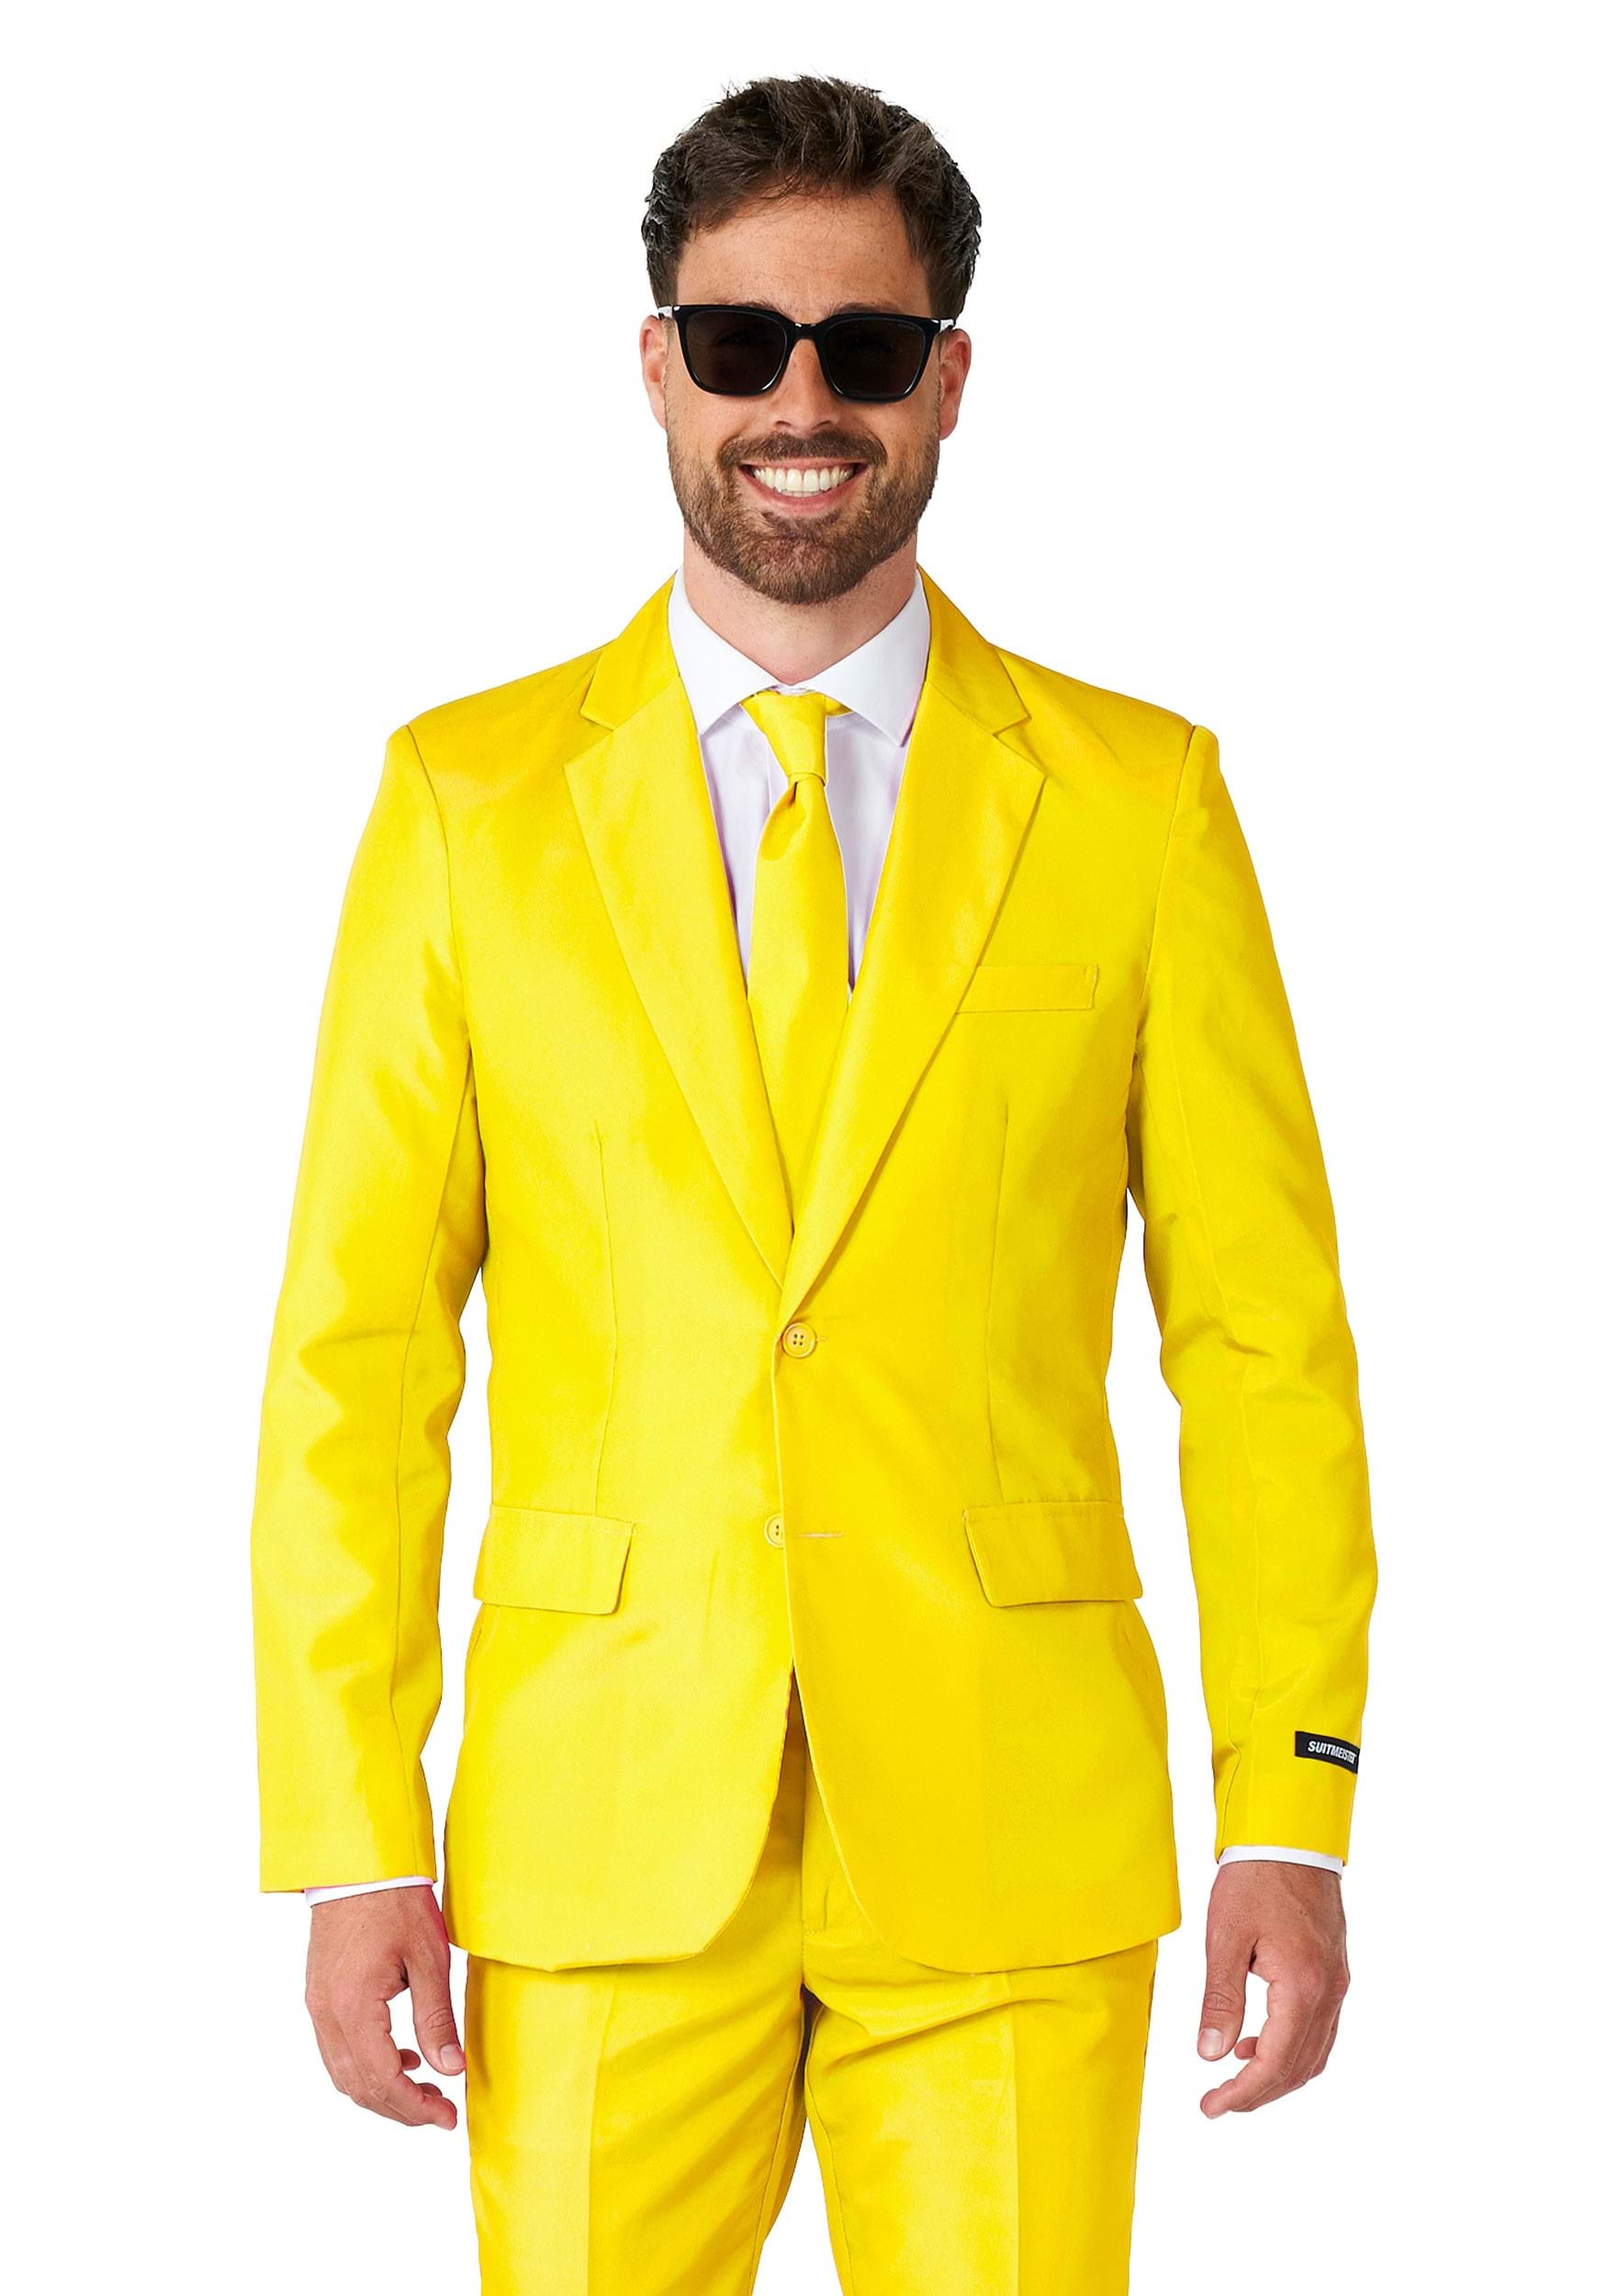 Mustard Yellow Three-piece Suit for Men Tailored Fit, the Rising Sun Store,  Vardo - Etsy